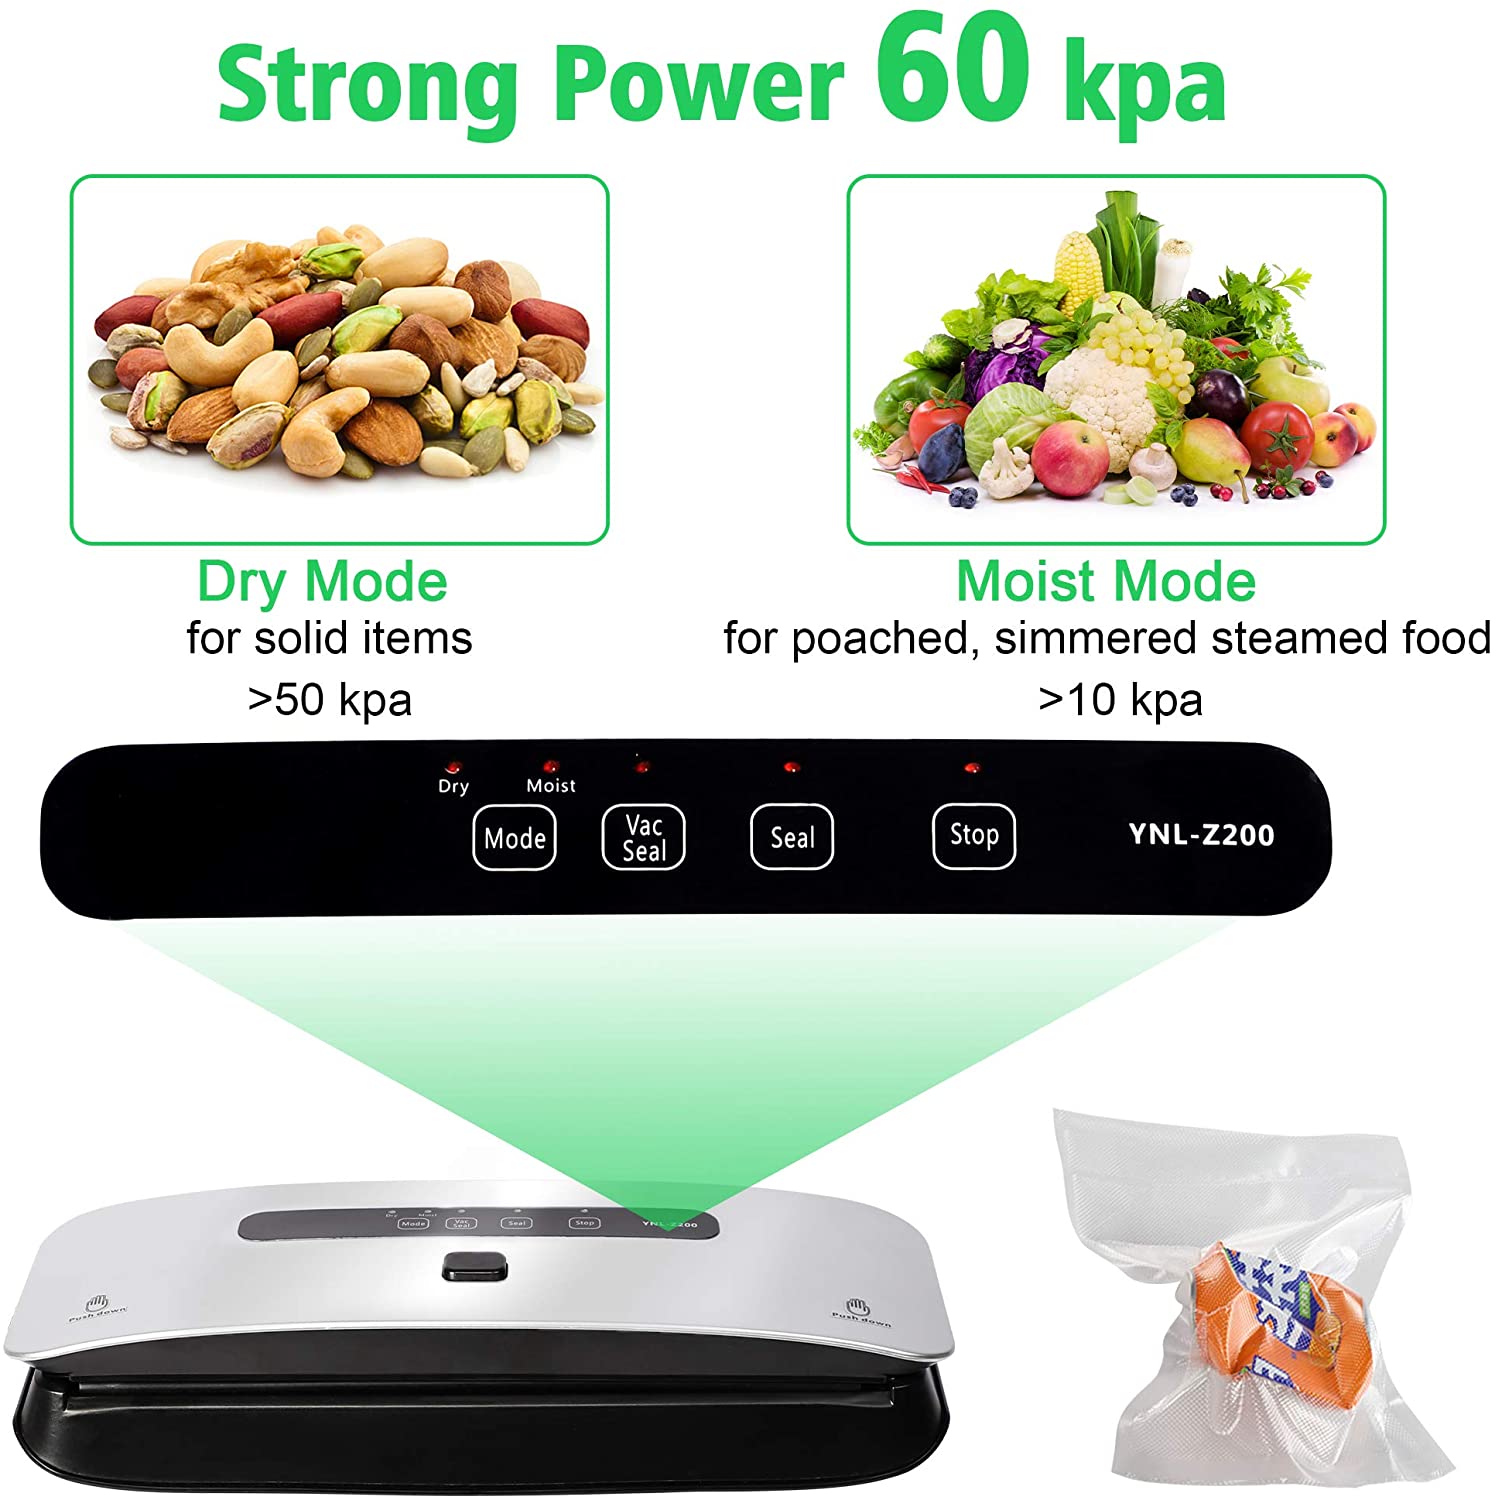 Food Vacuum Sealer Machine with Dry and Moist Mode for Food Preservation